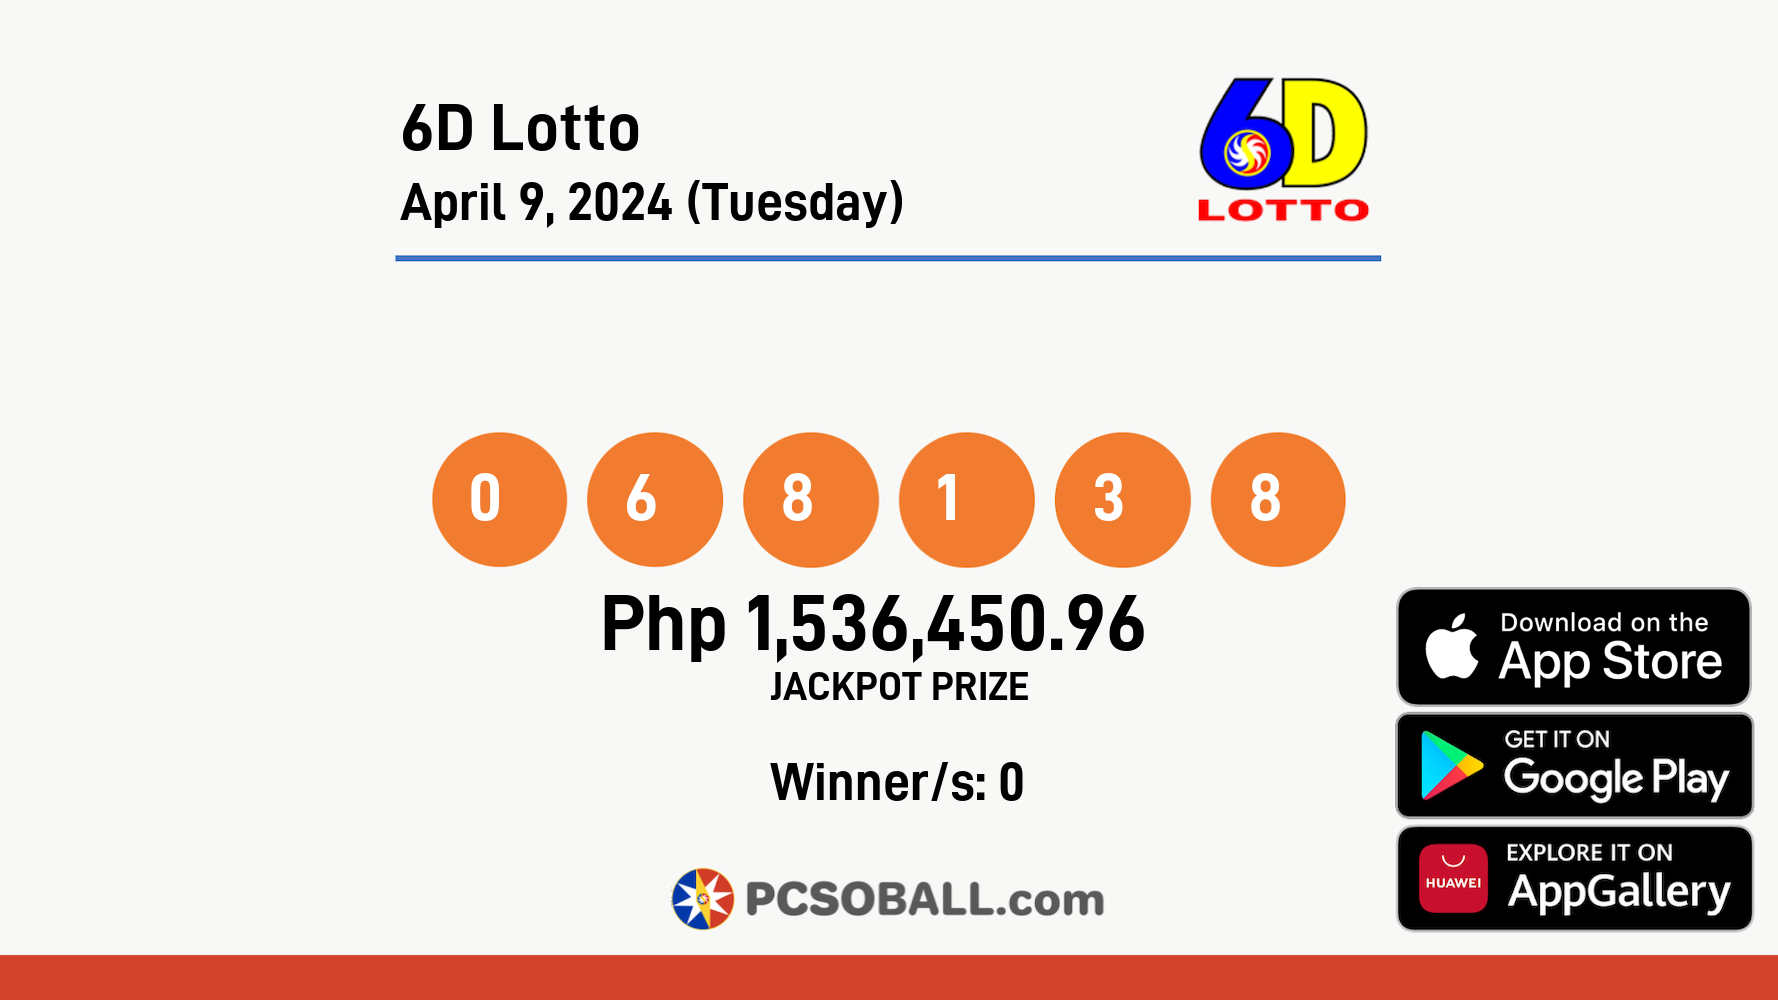 6D Lotto April 9, 2024 (Tuesday) Result